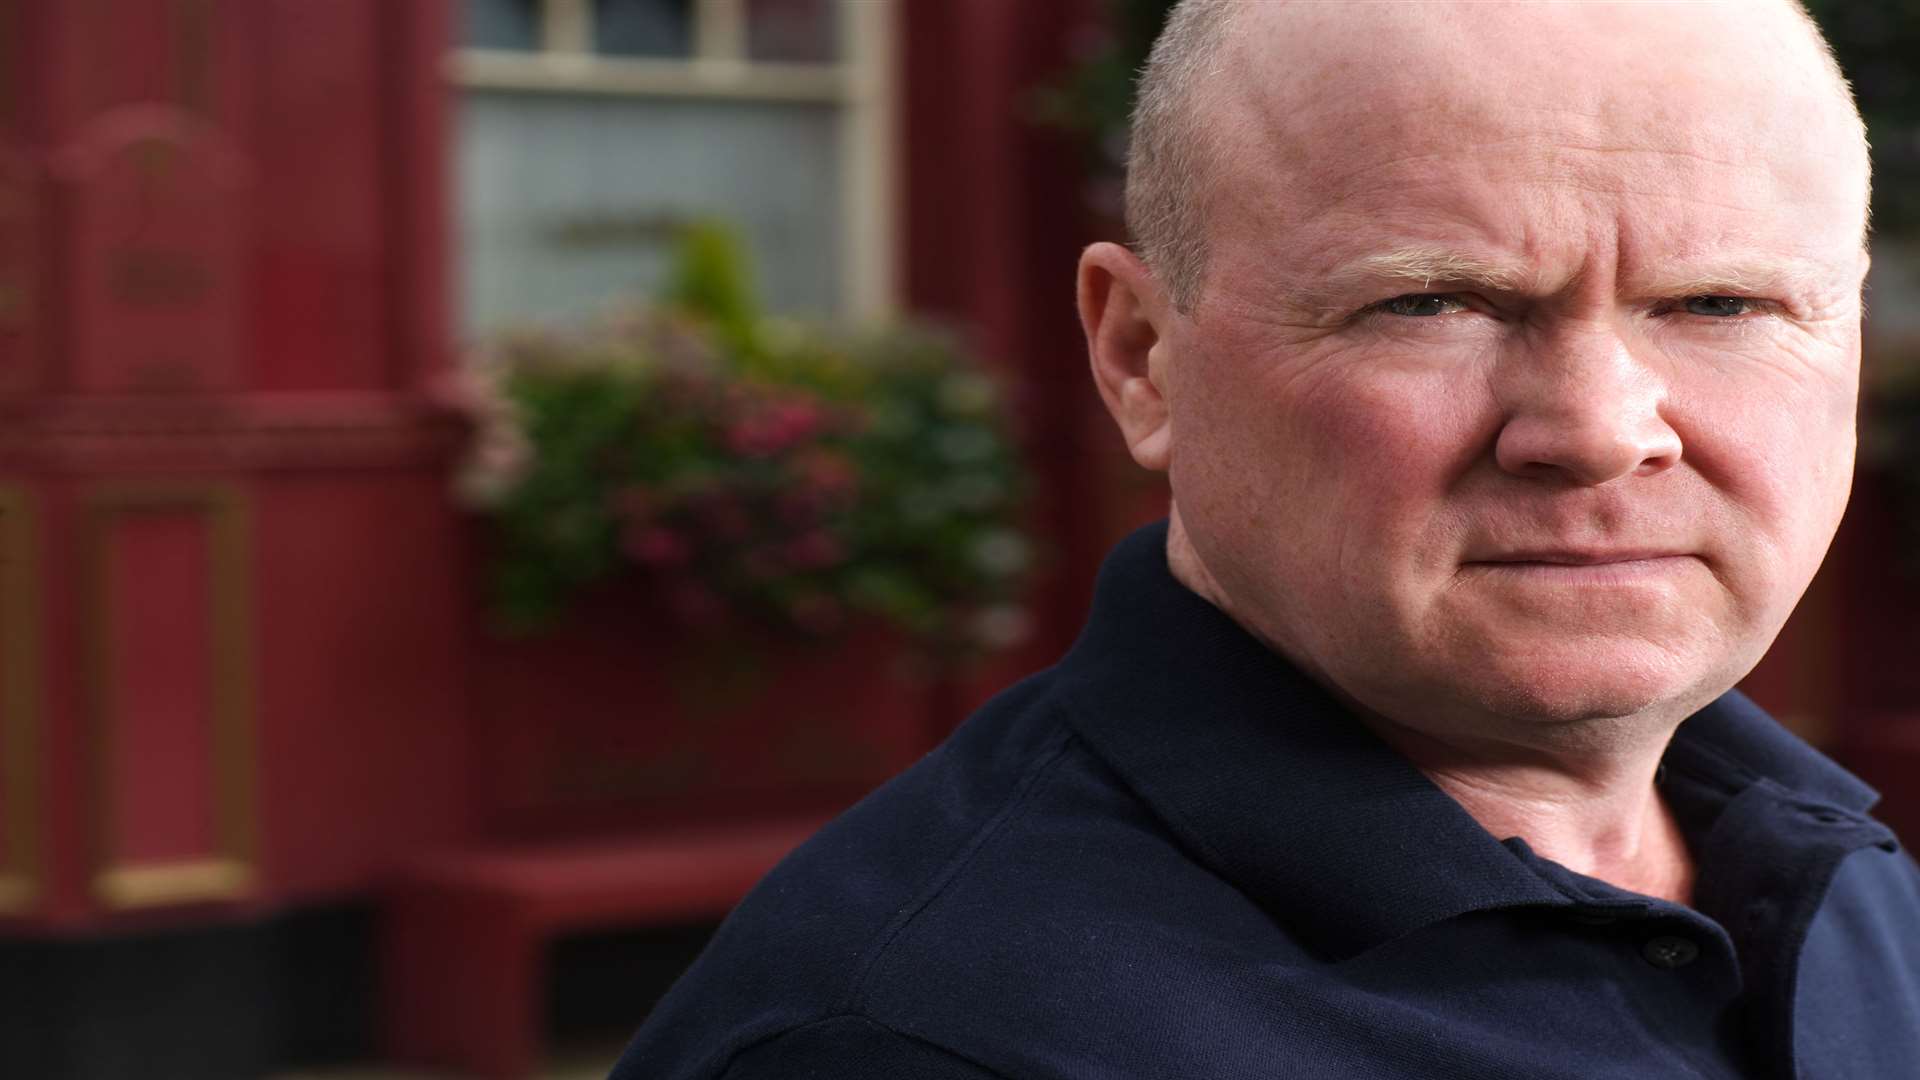 Phil Mitchell, played by Steve McFadden